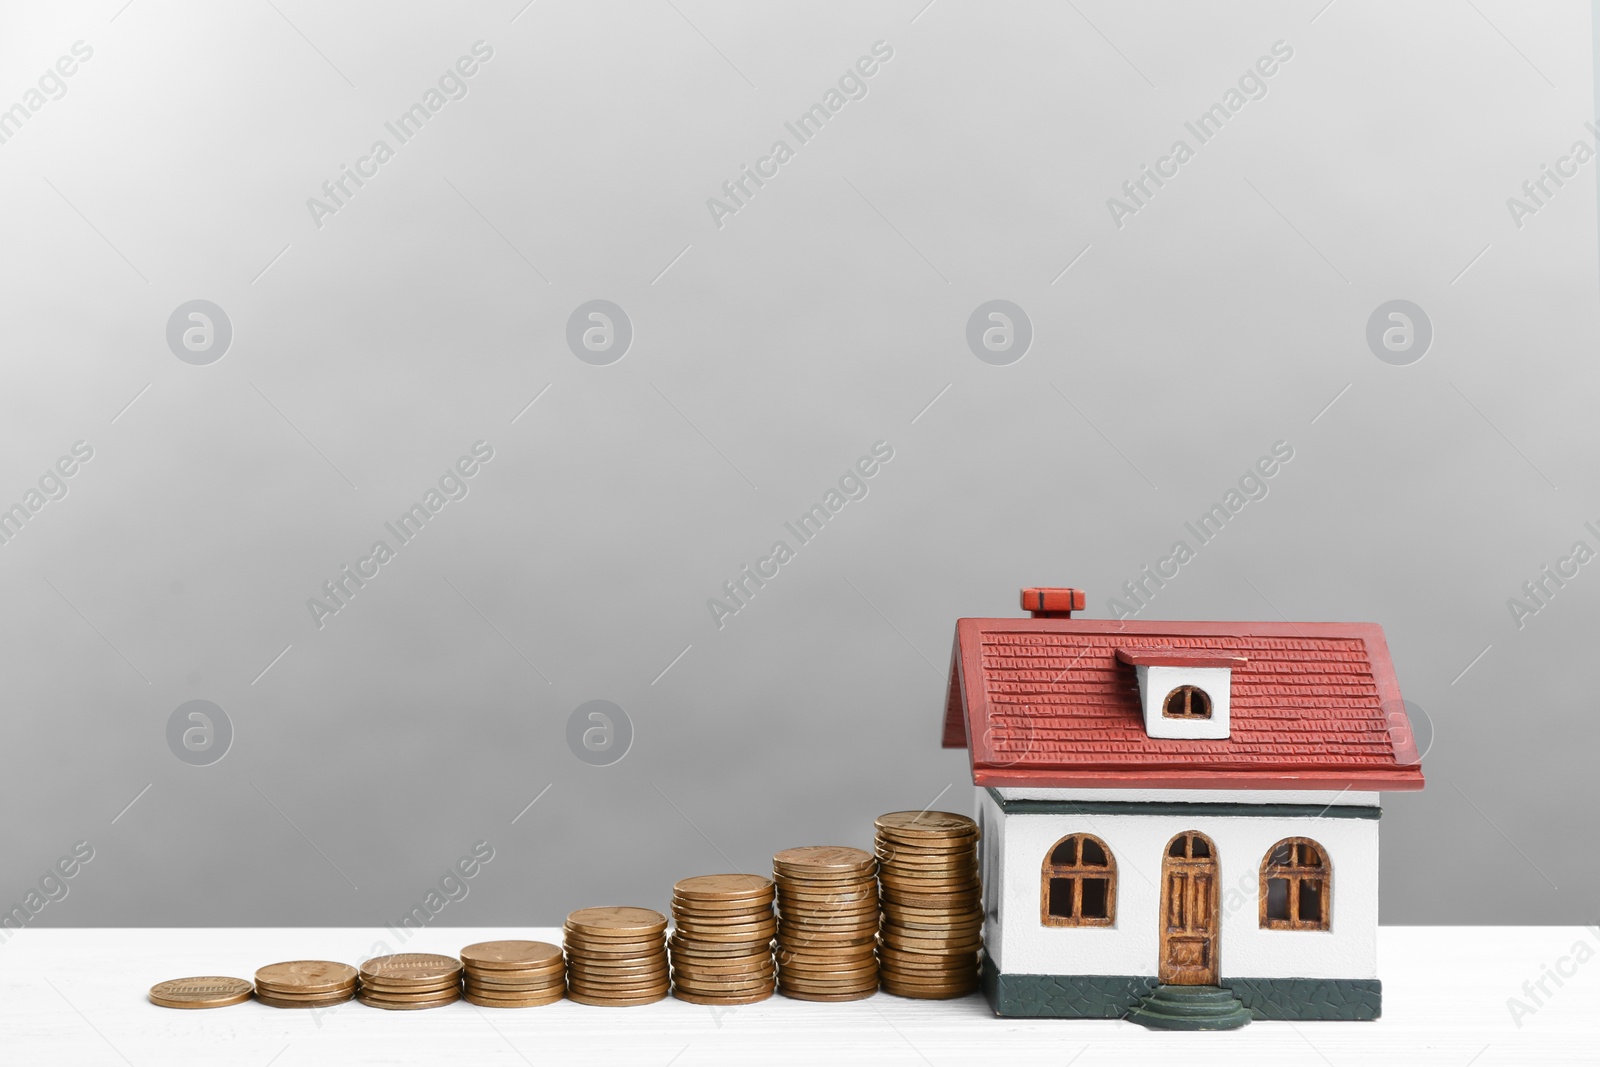 Photo of House model and coins on white wooden table against light grey background. Money savings